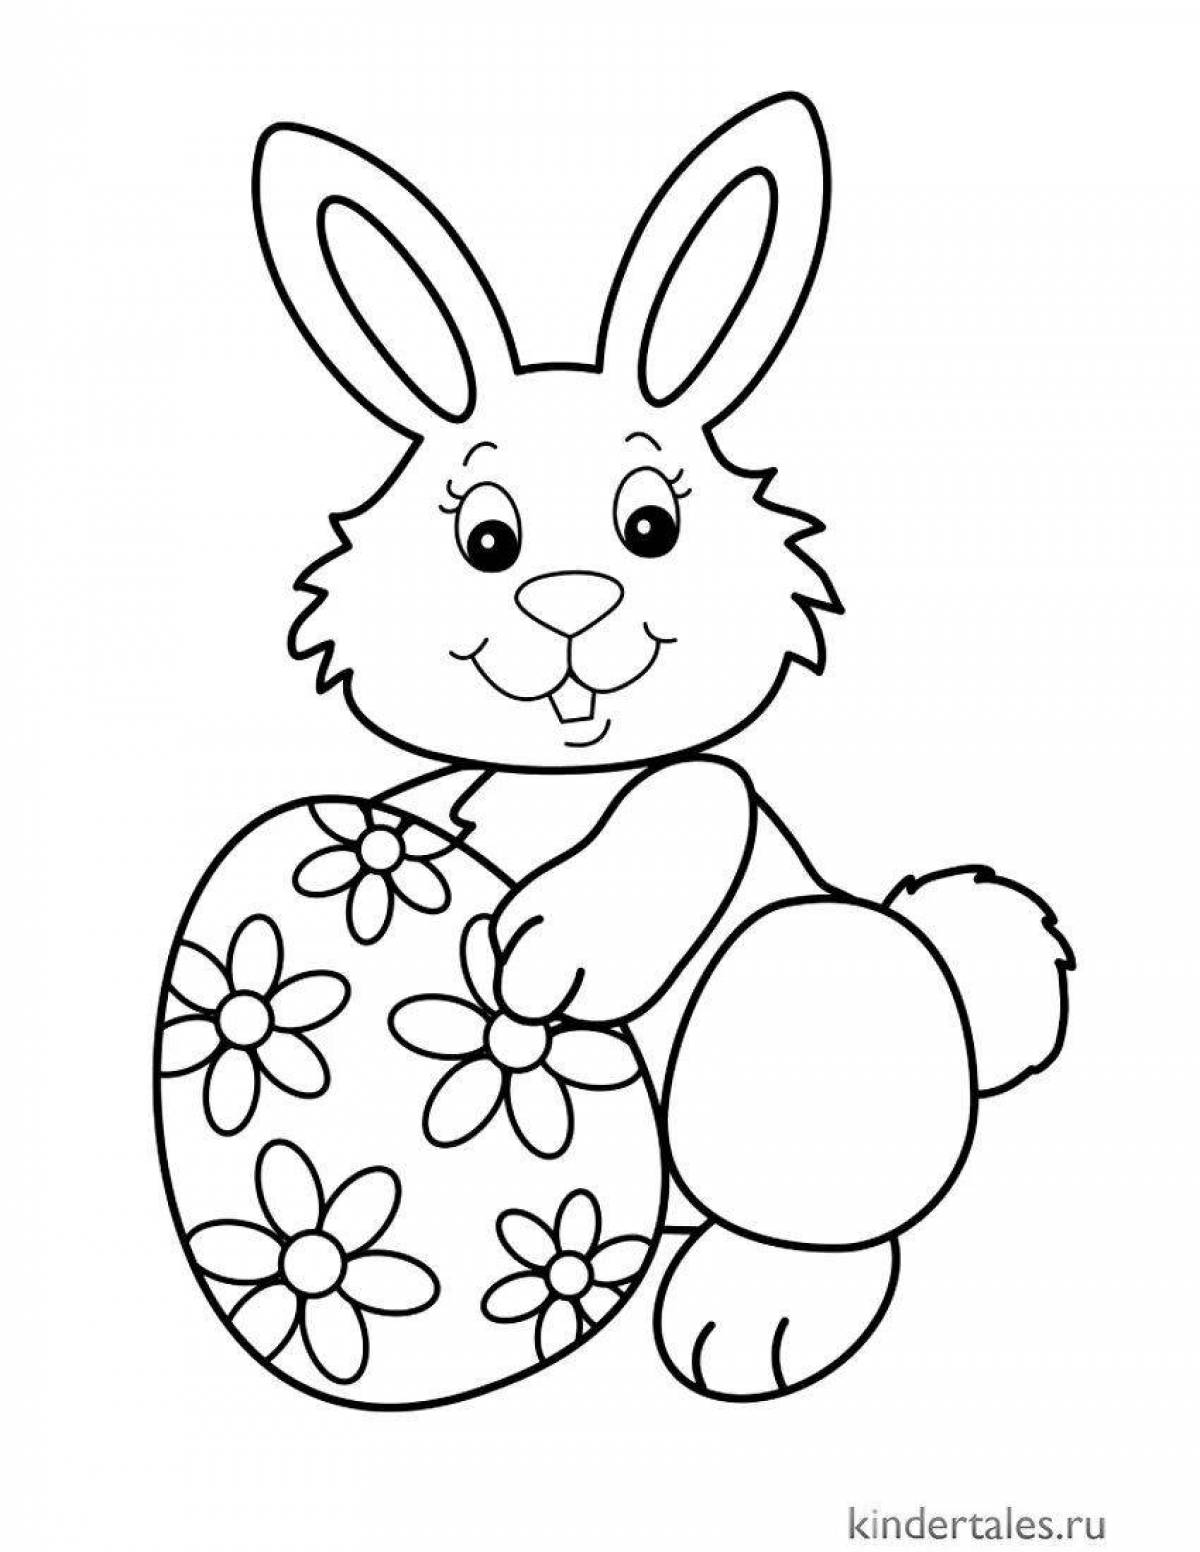 Color-explosion coloring hare for children